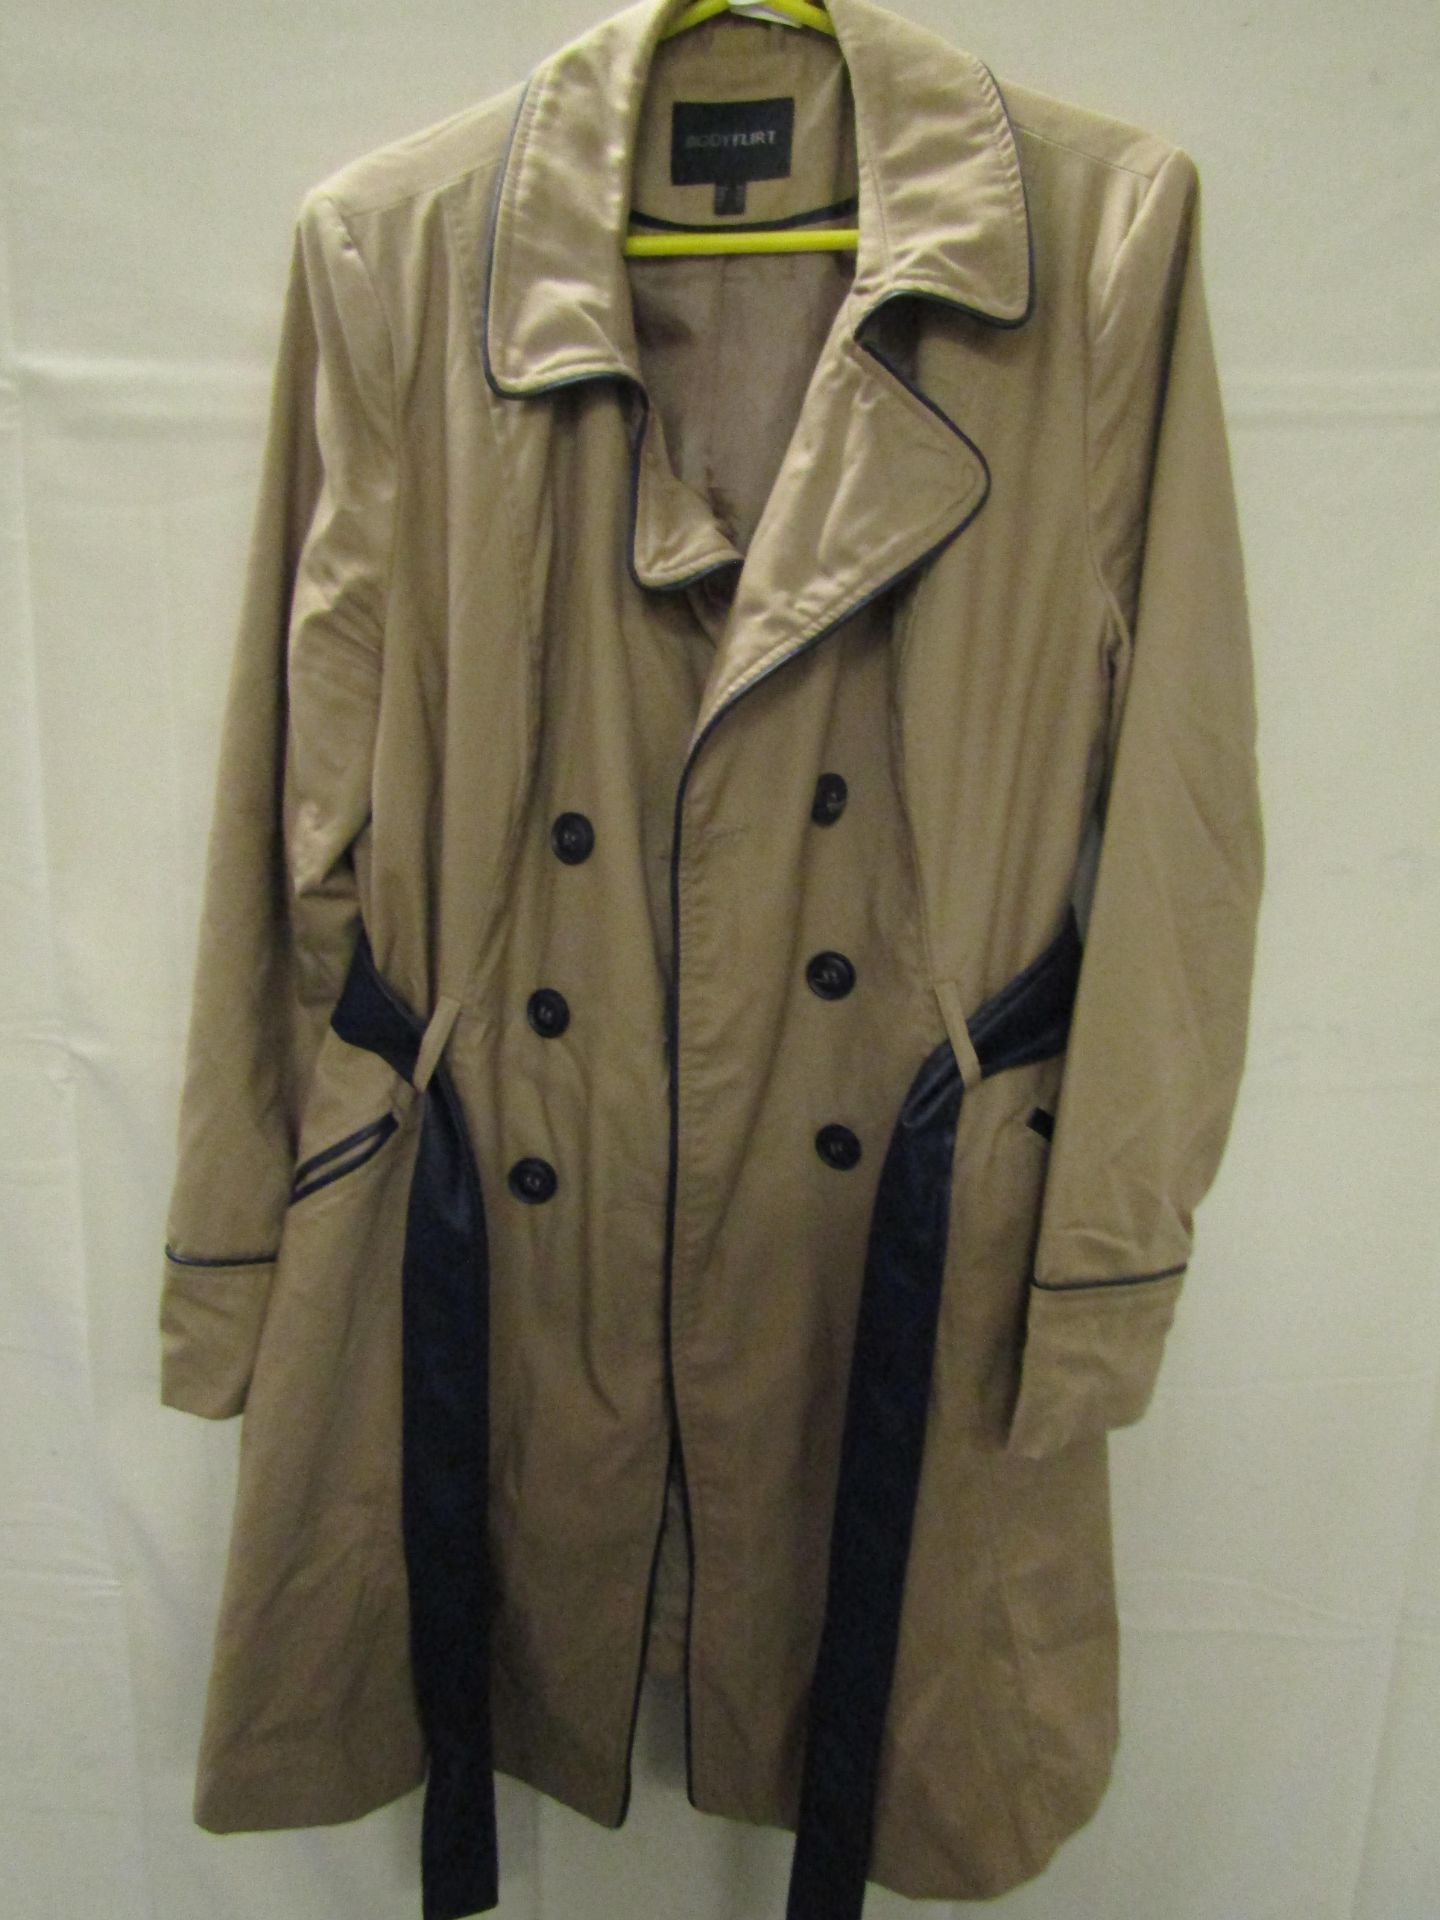 BodyFlirt Coat camel Colour Size 20 ( may Have Been Worn ) Lools In Good Condition